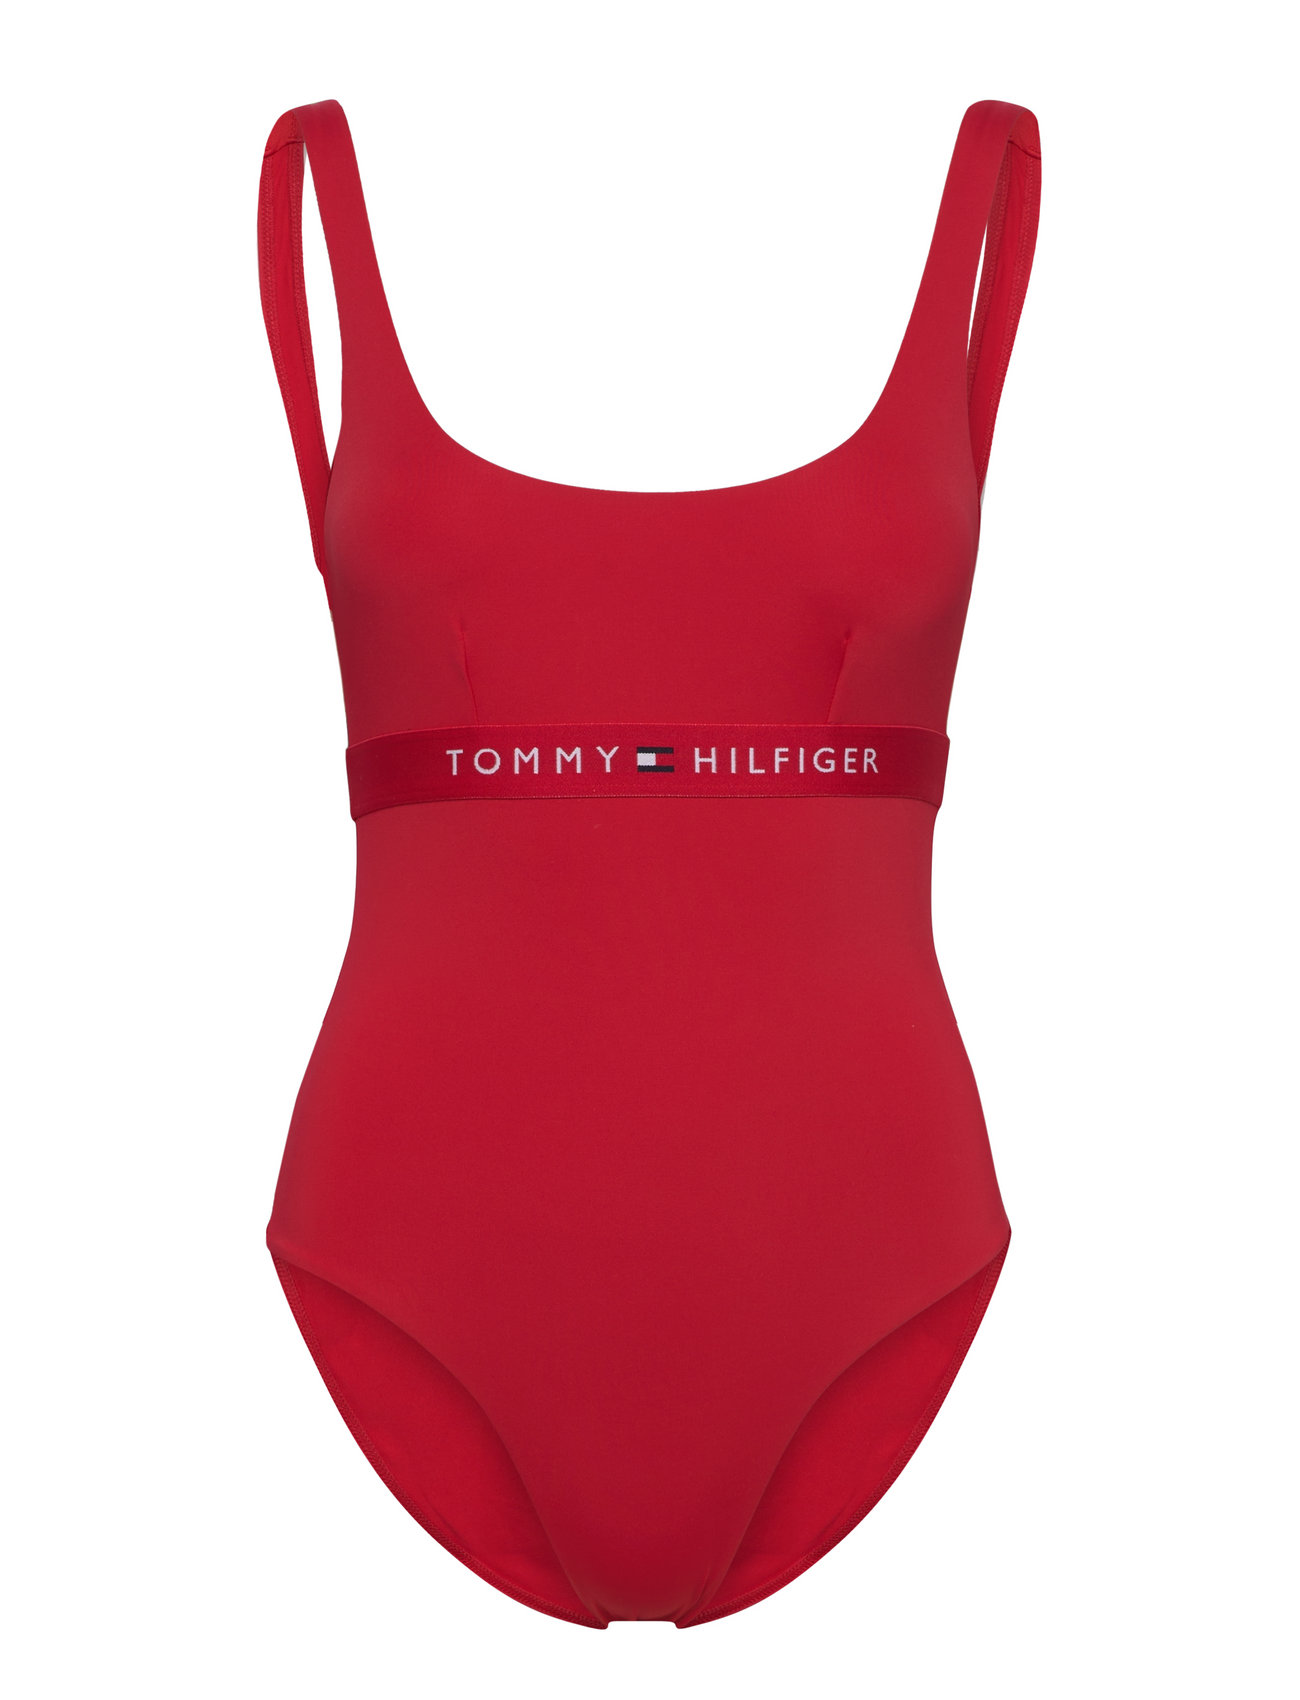 Tommy Hilfiger One Piece Swimsuits - Boozt.com